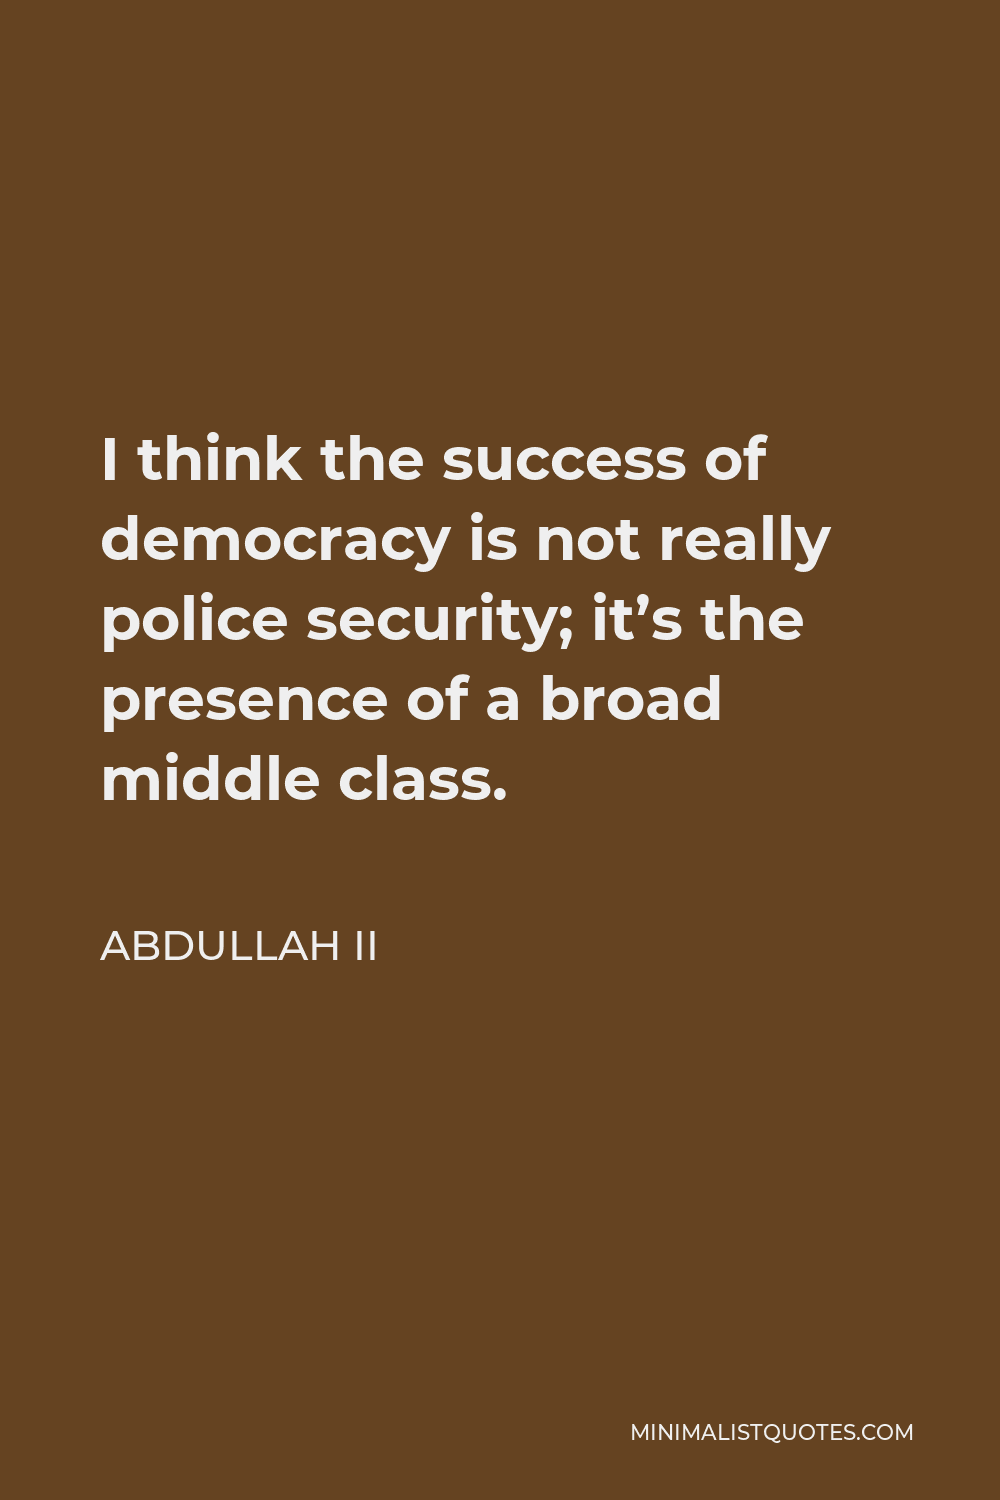 Abdullah II Quote - I think the success of democracy is not really police security; it’s the presence of a broad middle class.